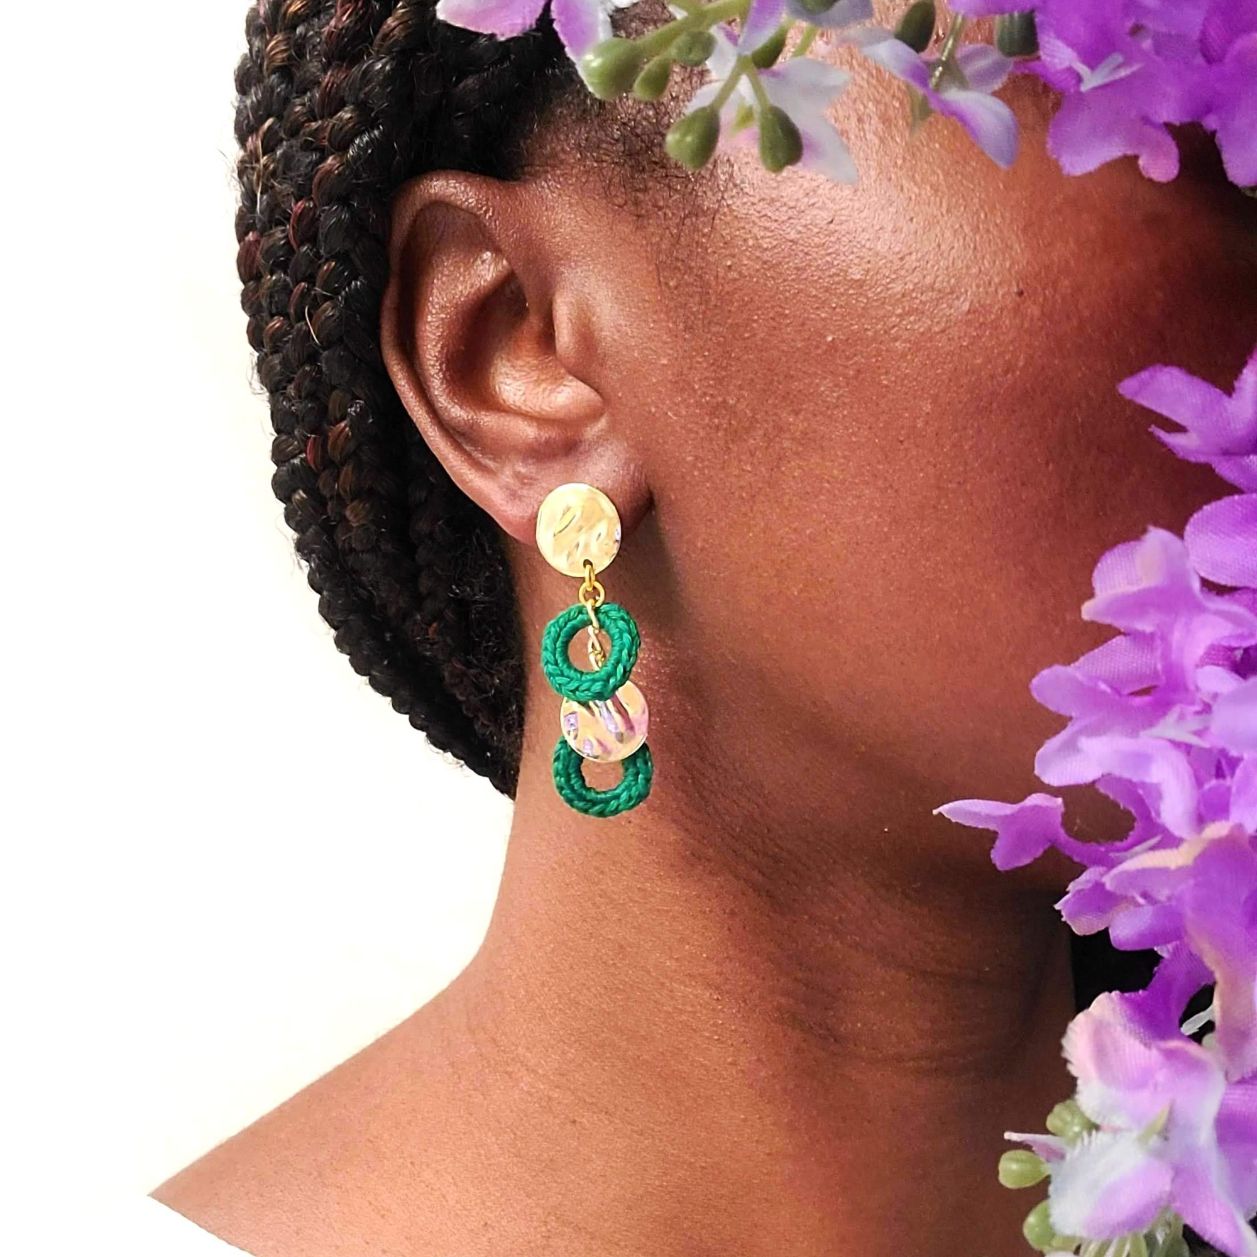 Model wearing a pair of circle and gold earrings.